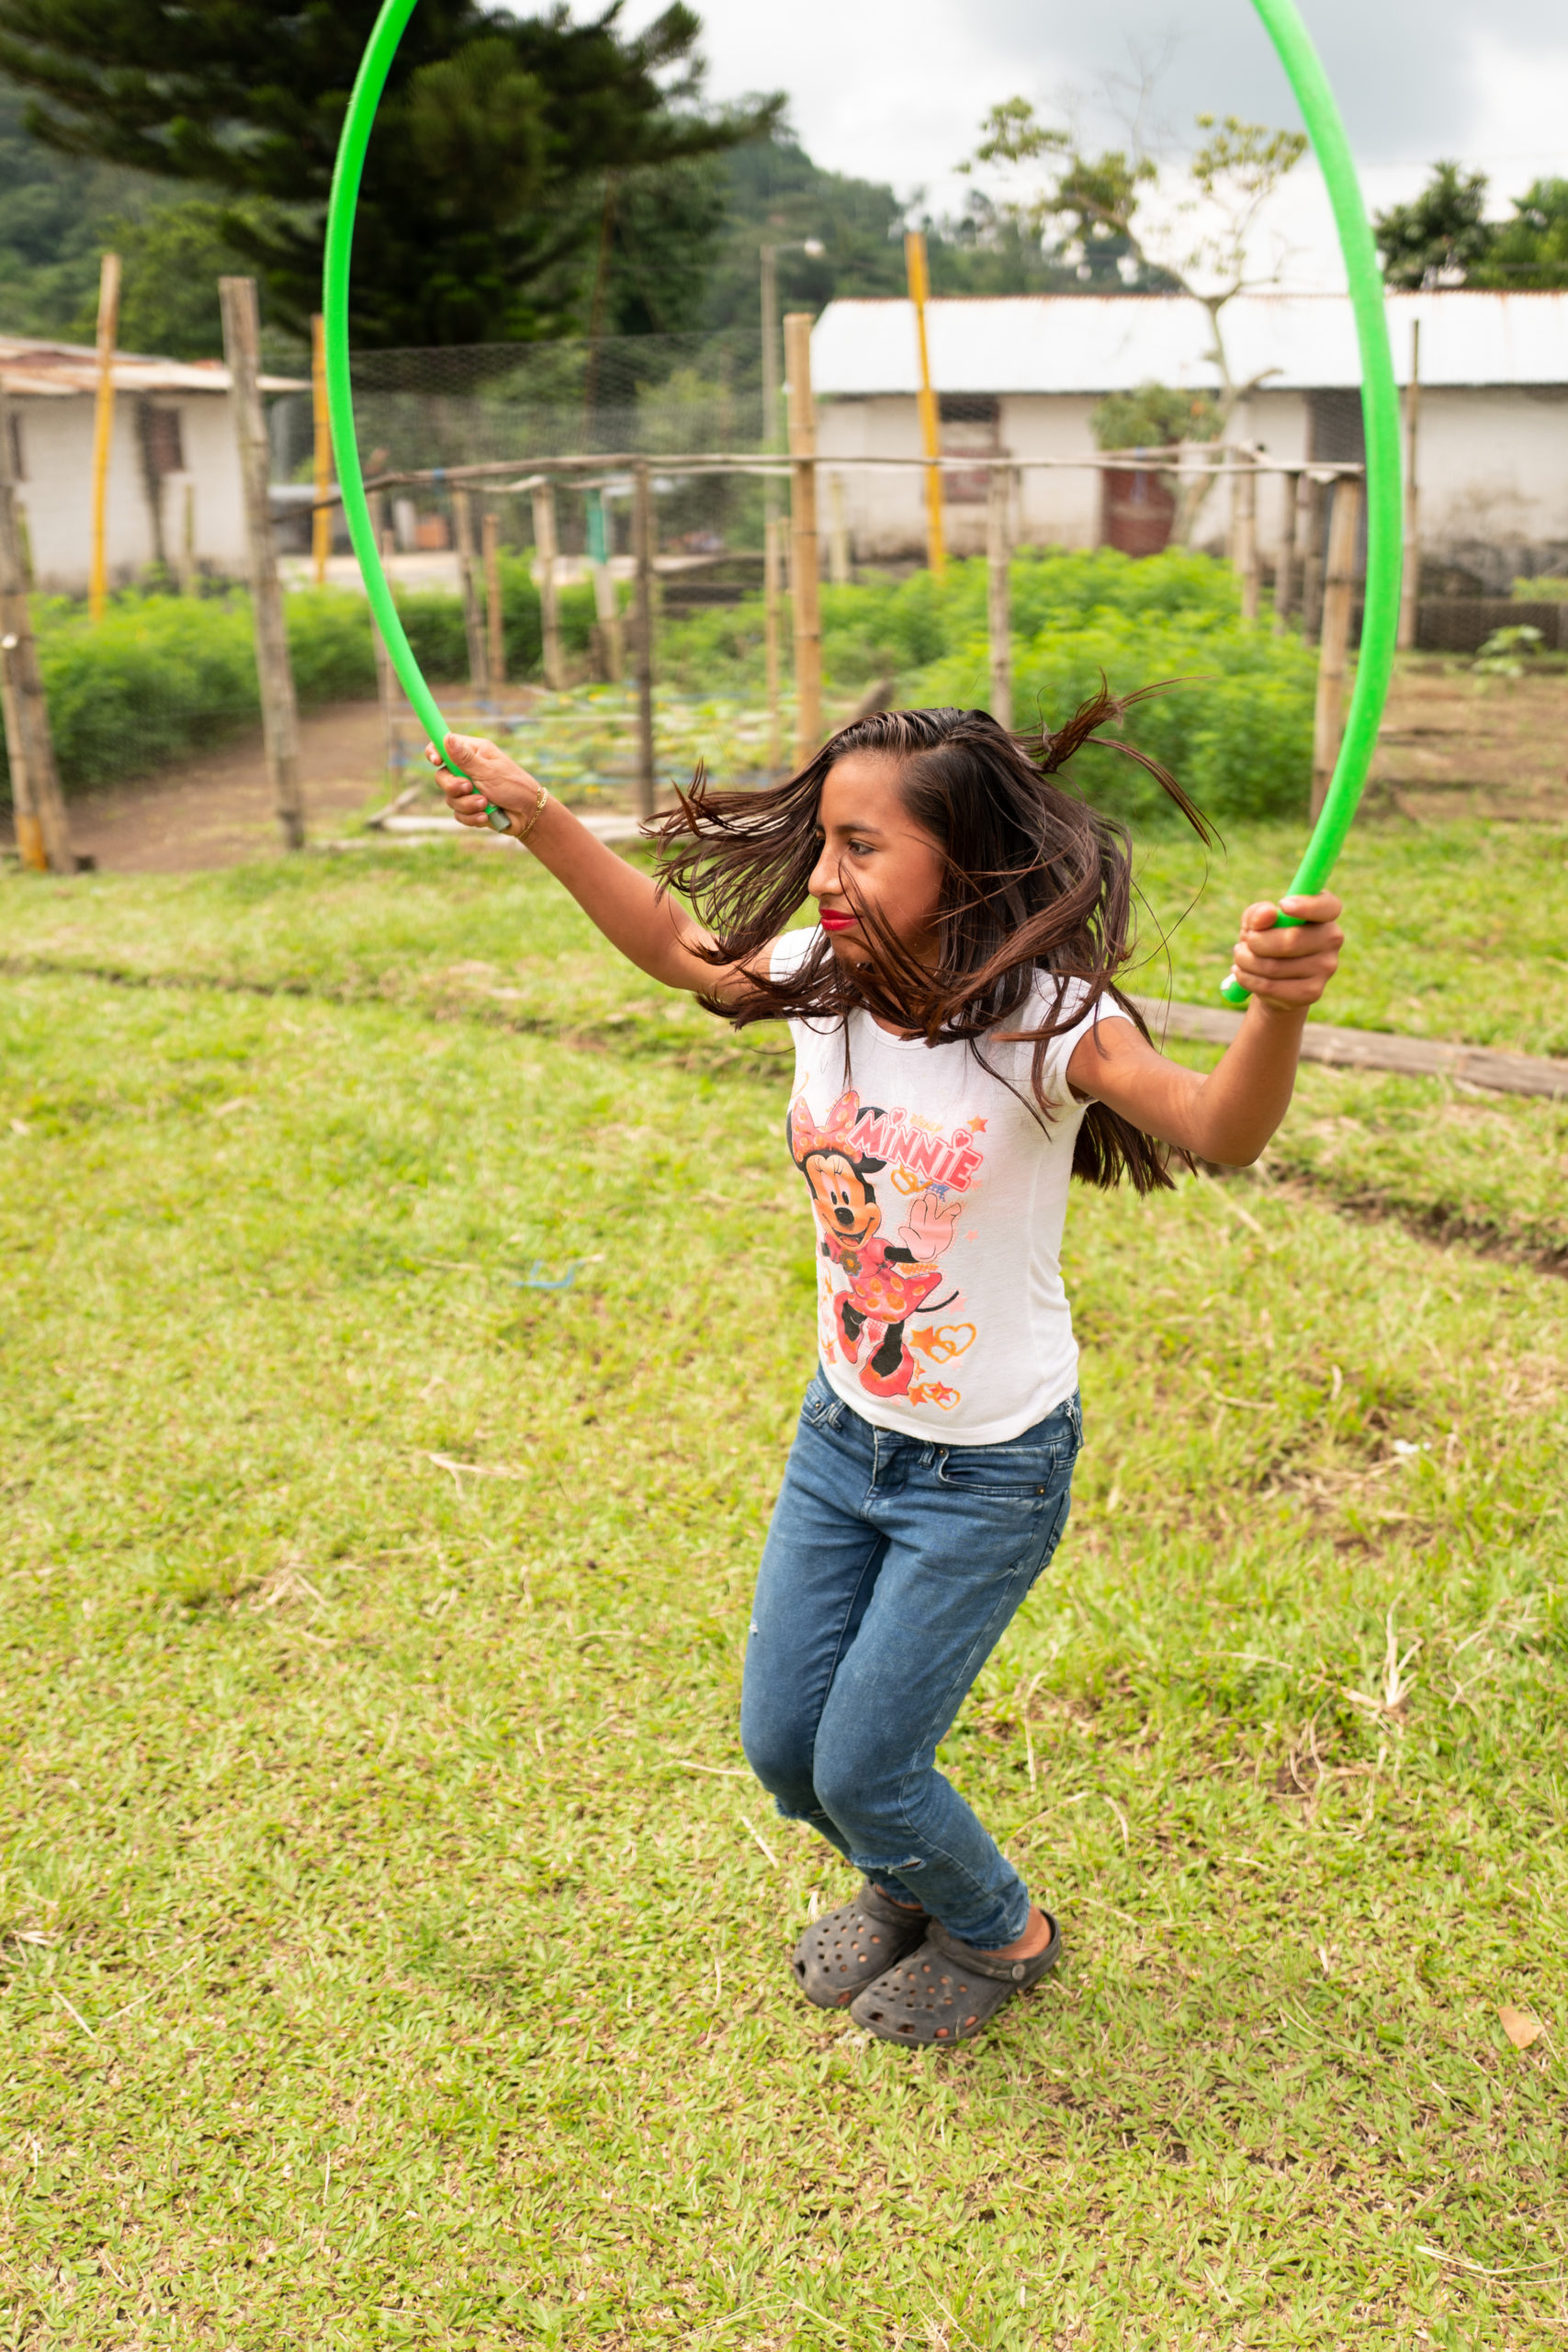 A student in Guatemala plays with a jump rope on school grounds